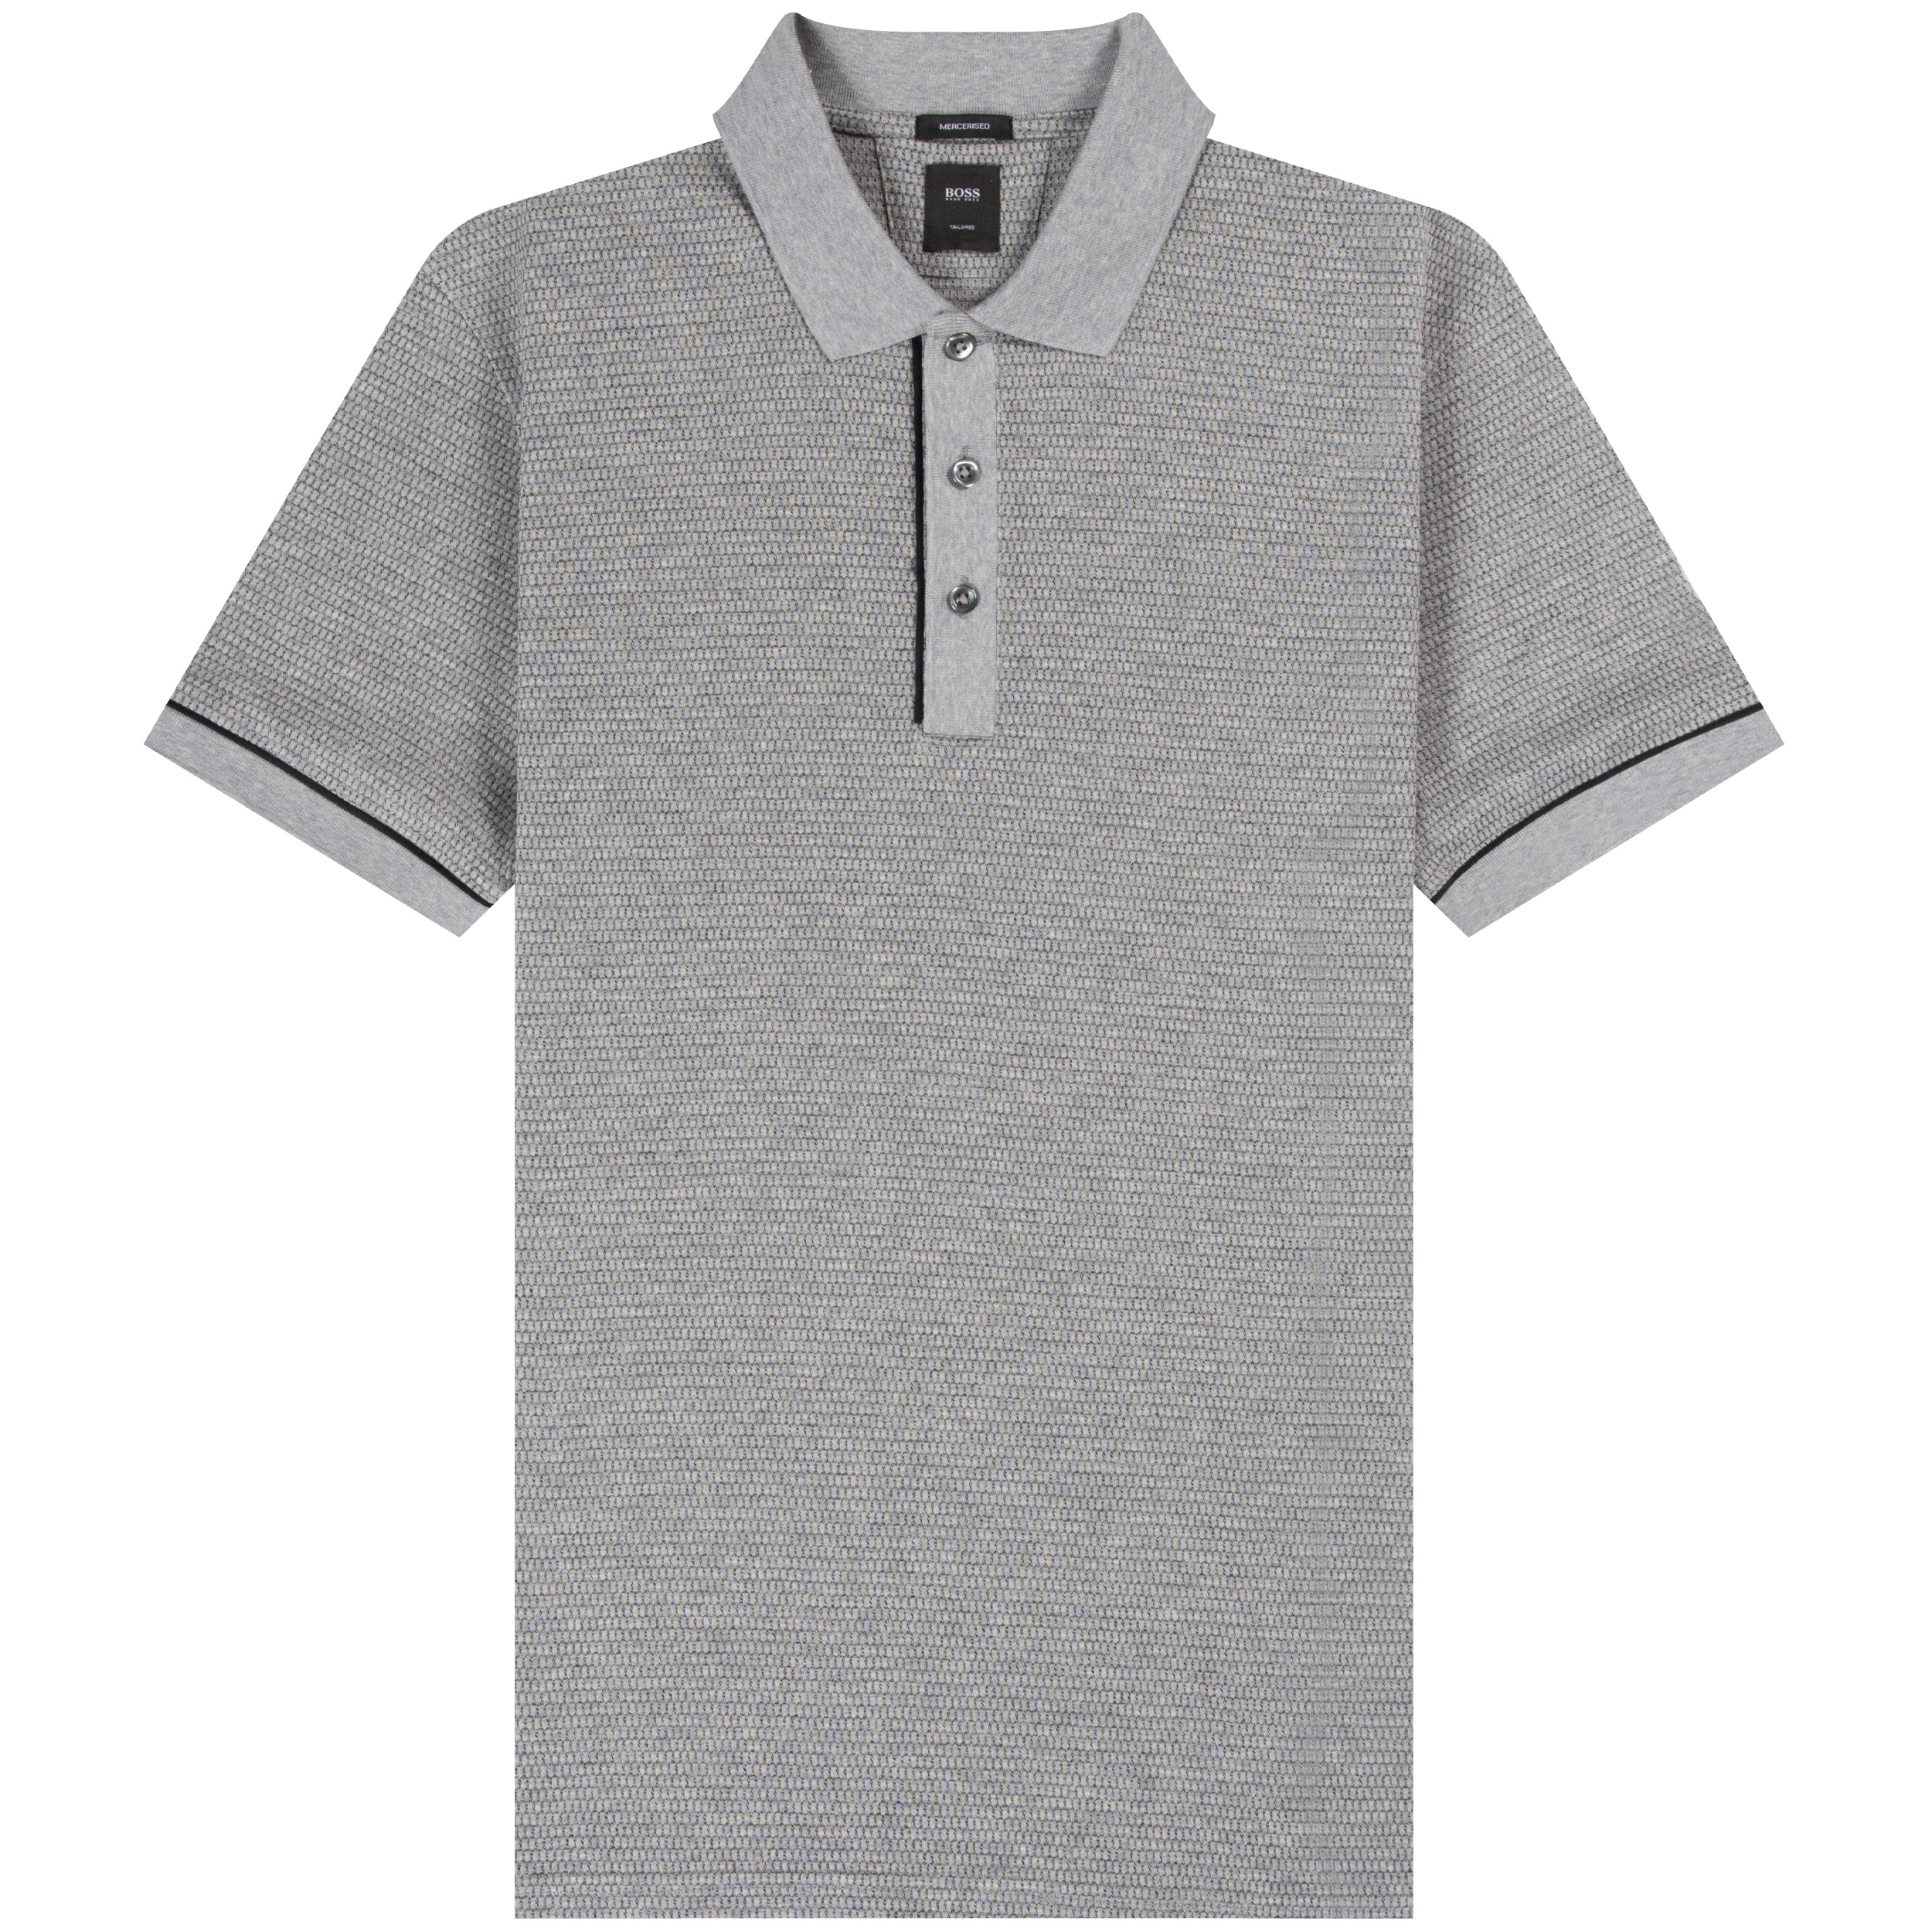 HUGO BOSS ’T-Perry’ Honeycomb Weave With Contrast Collar Silver